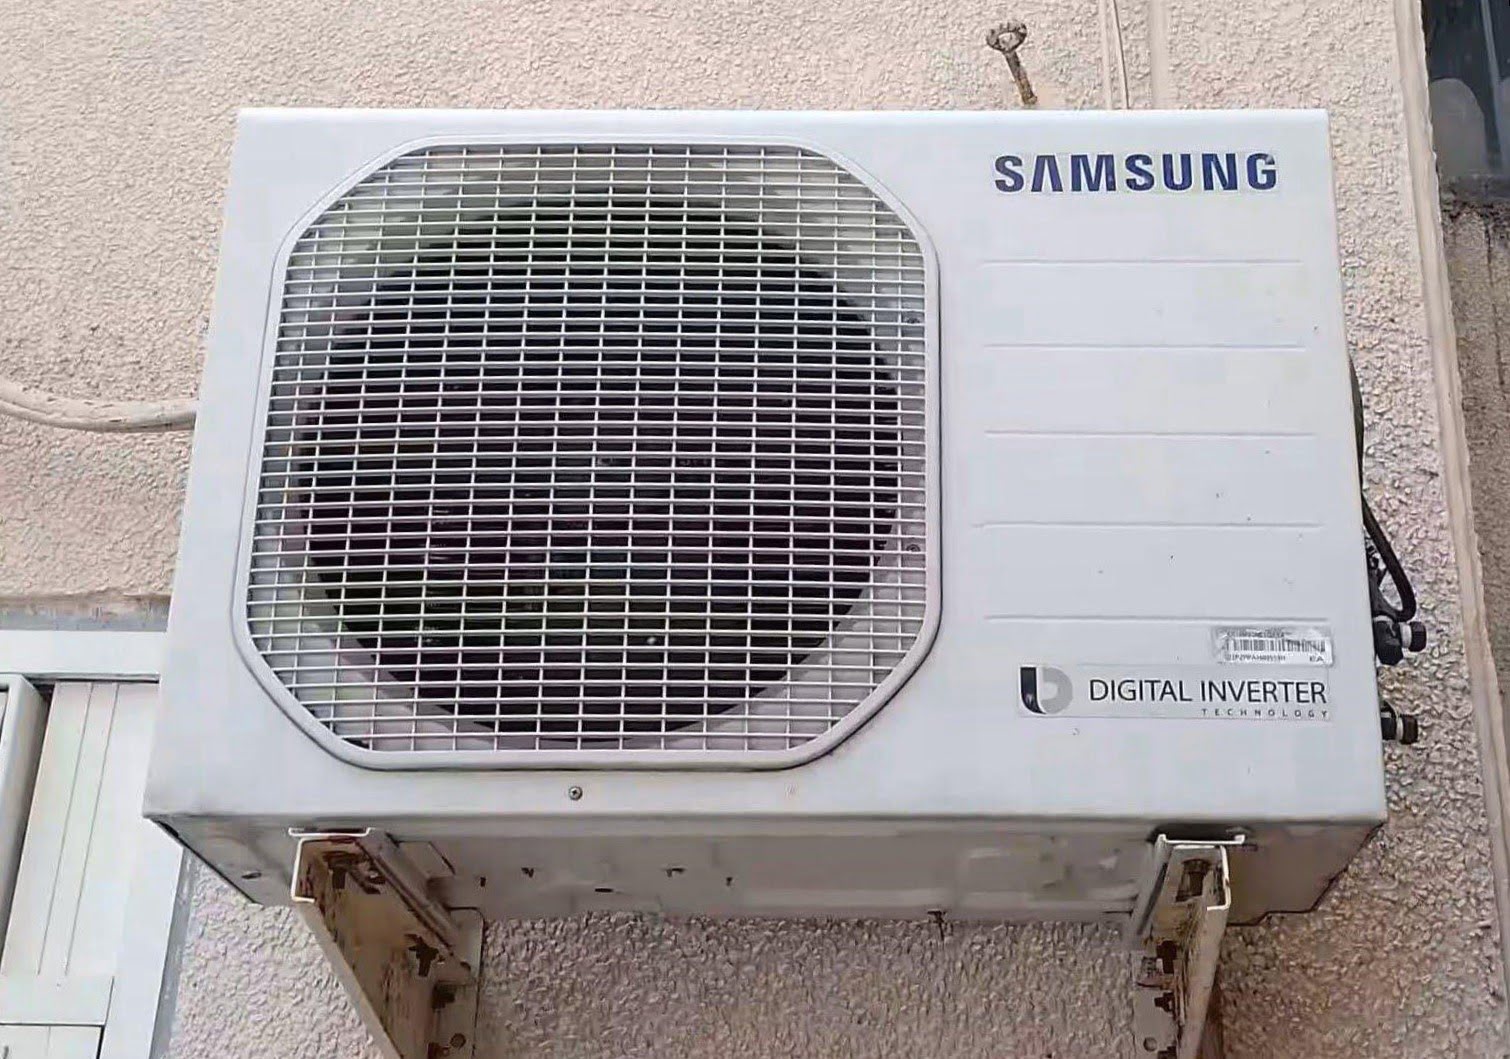 How To Fix The Error Code E209 For Samsung Air Conditioner